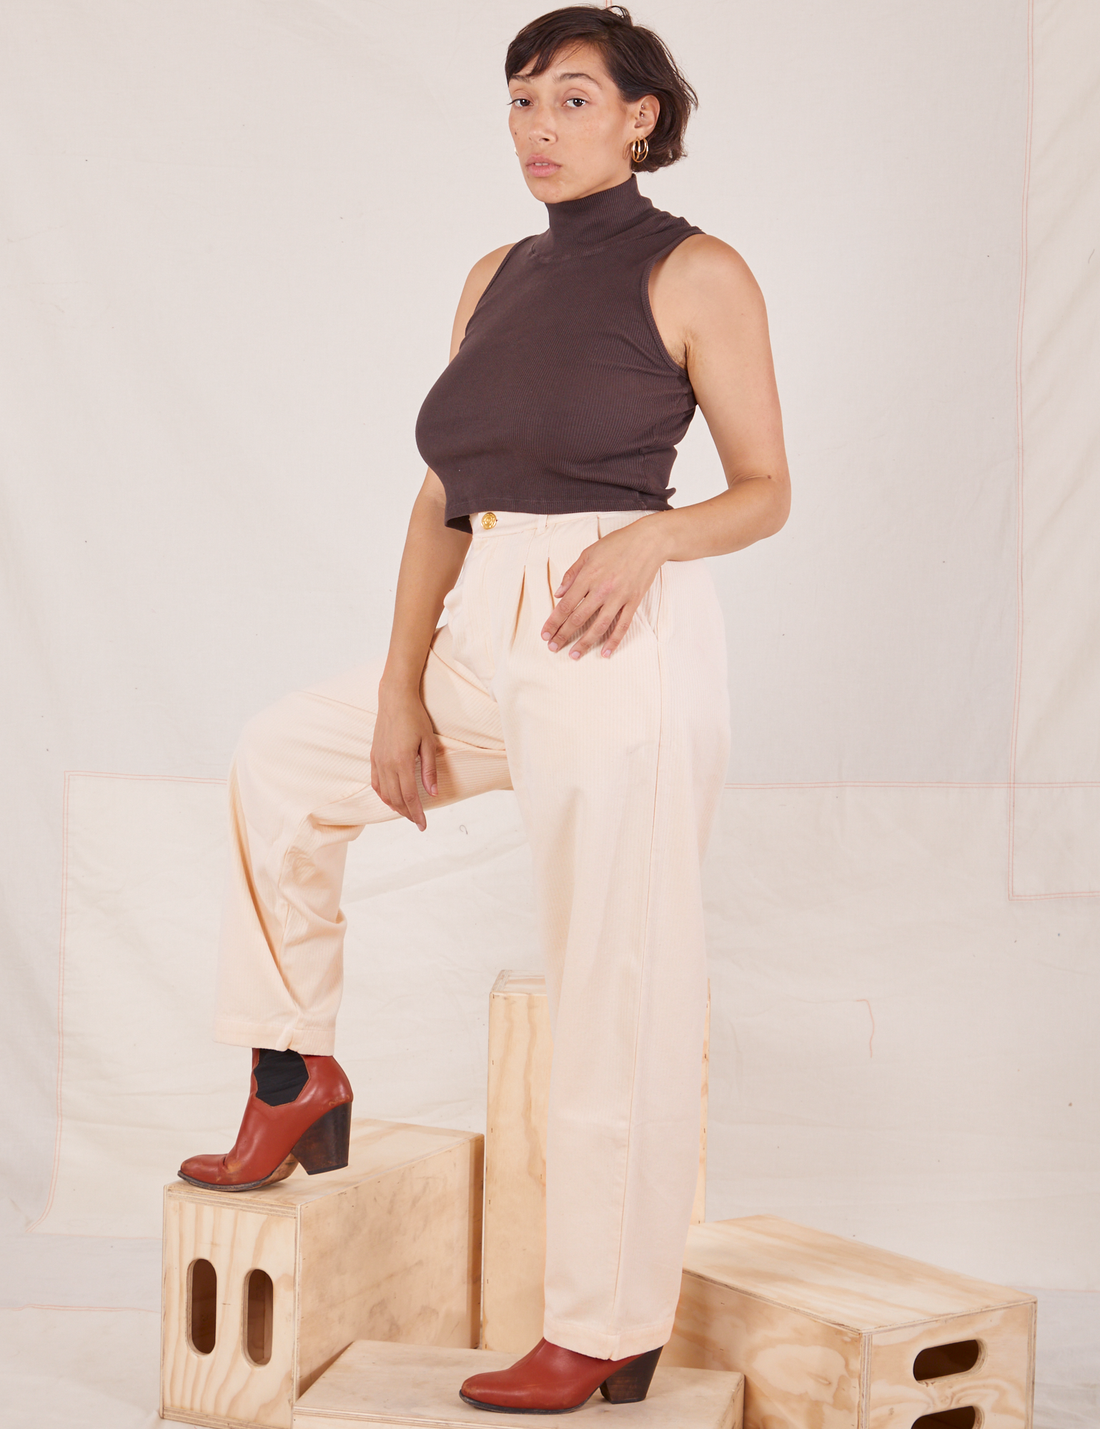 Tiara is wearing Heritage Trousers in Vintage Off-White and the Sleeveless Turtleneck in espresso brown